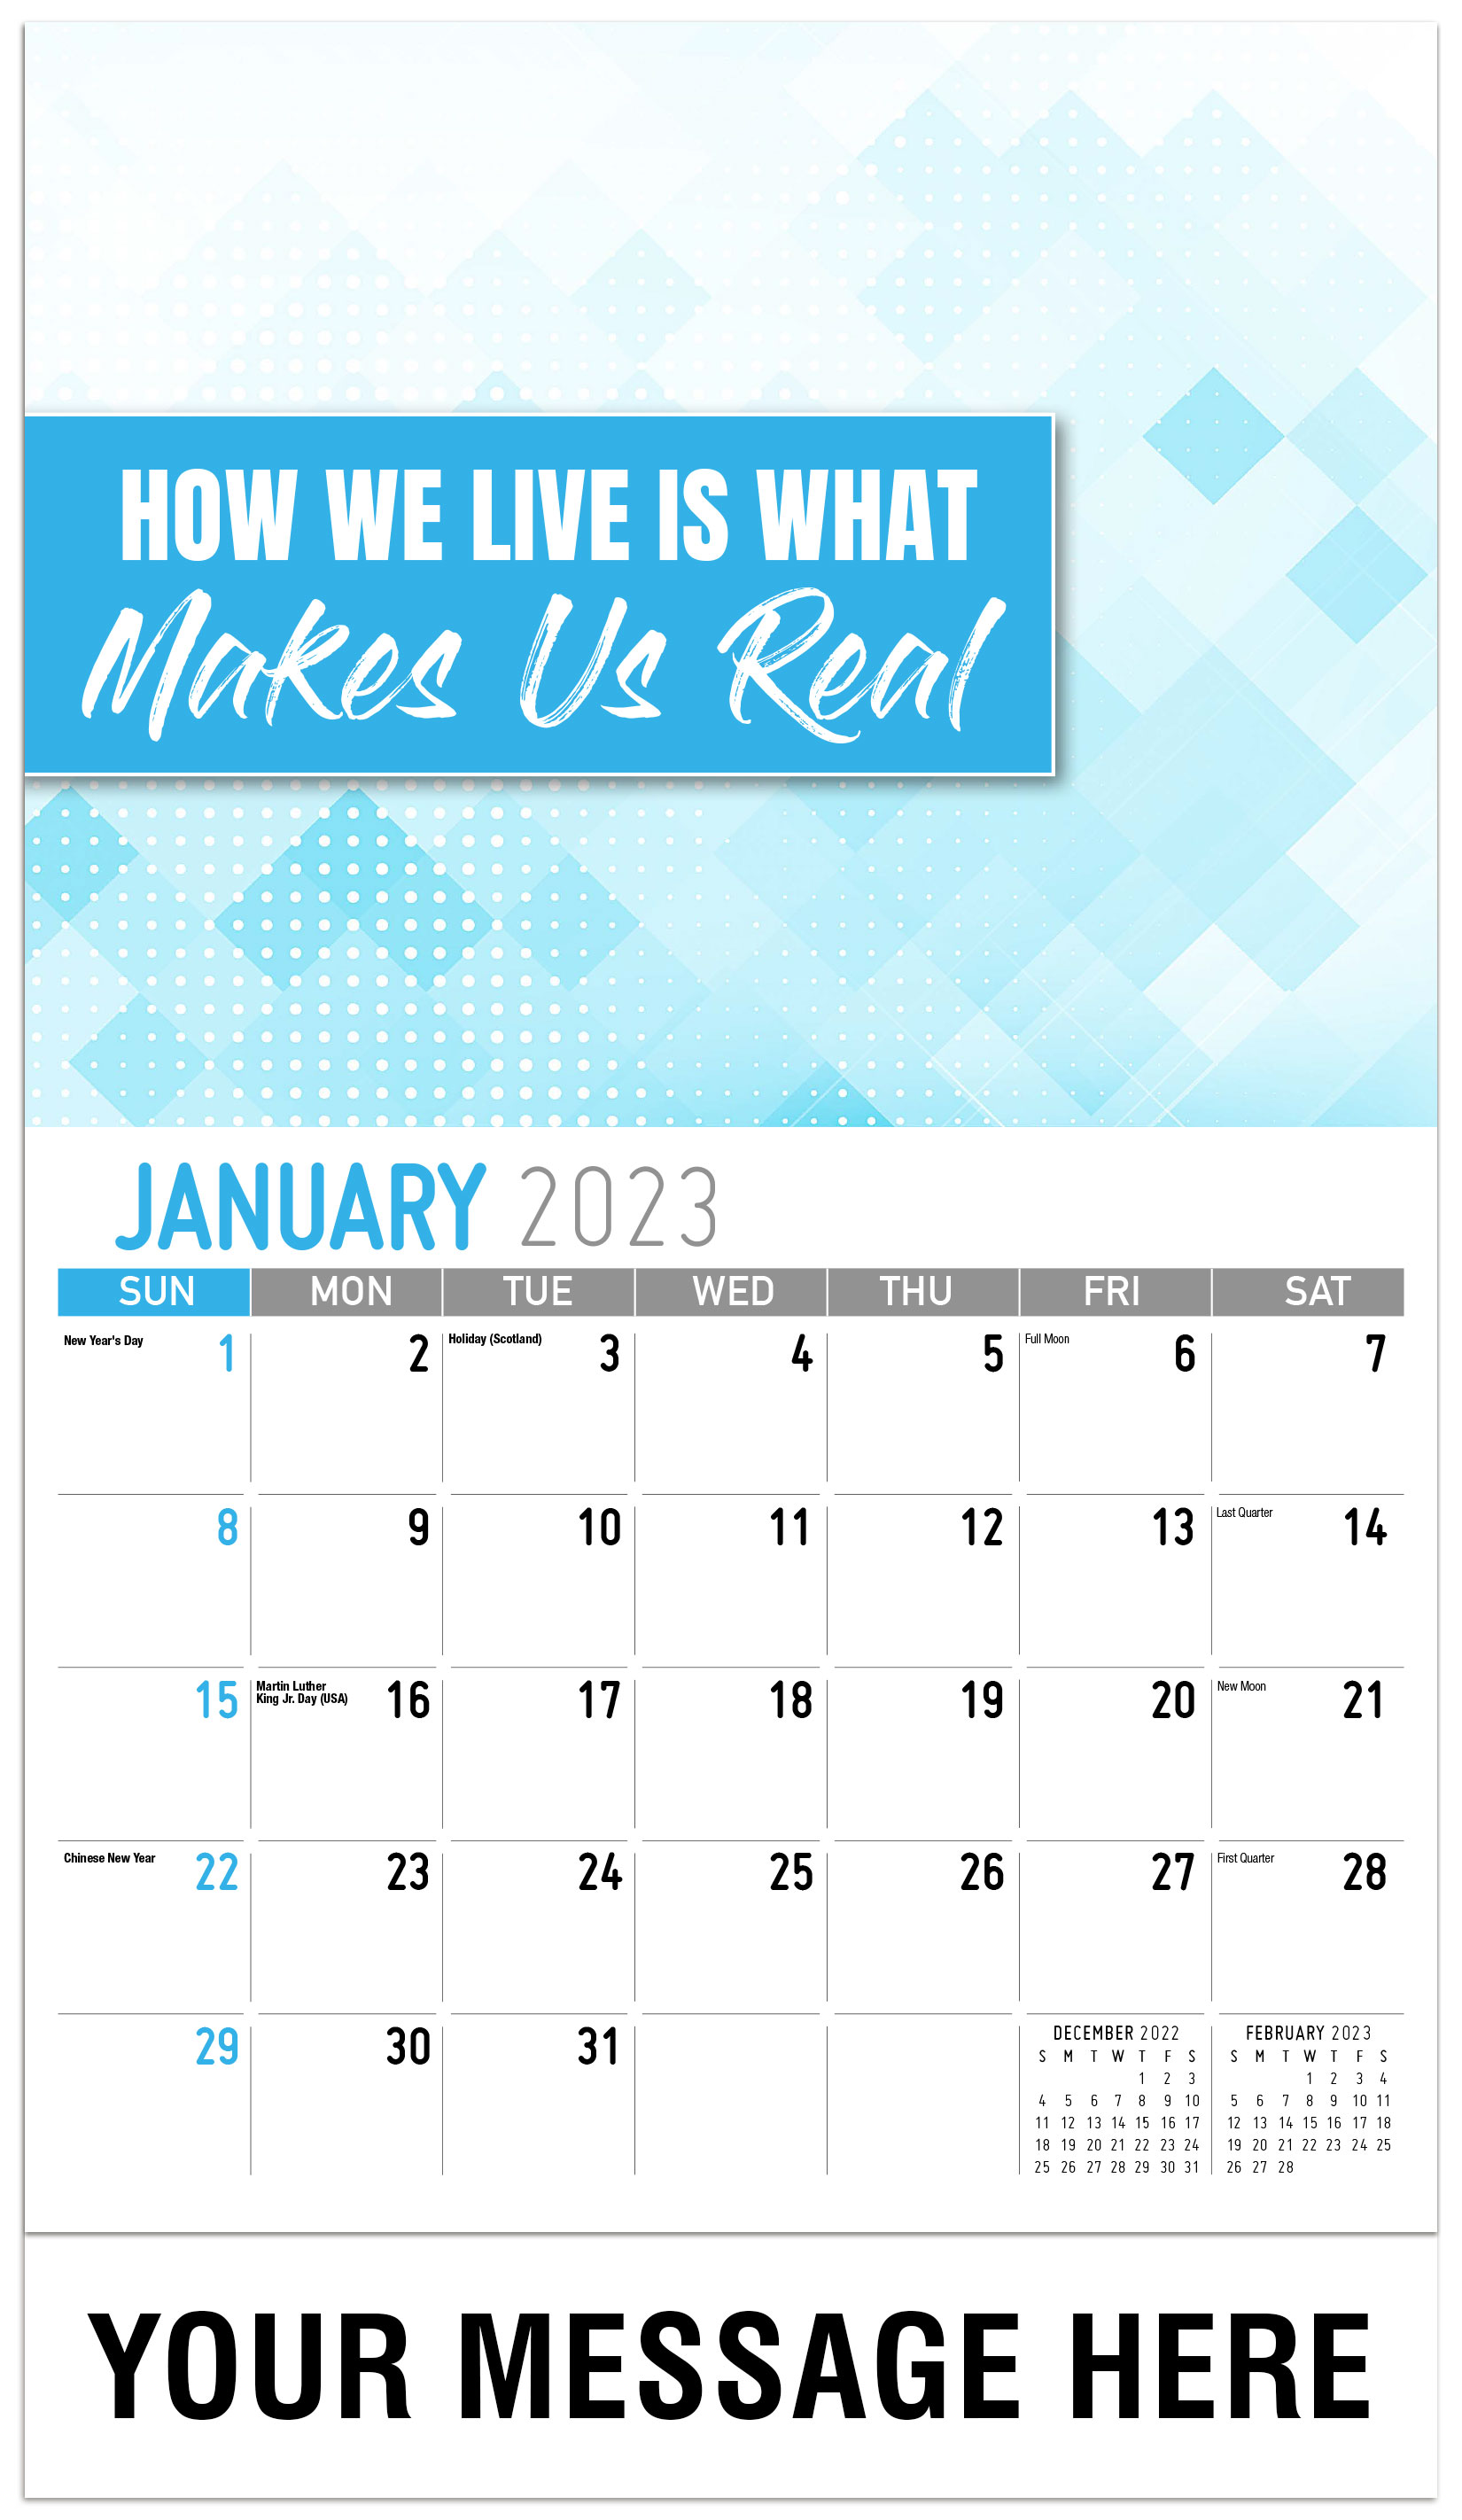 How We Live Is What 
Makes Us Real - January - Arts and Thoughts 2023 Promotional Calendar